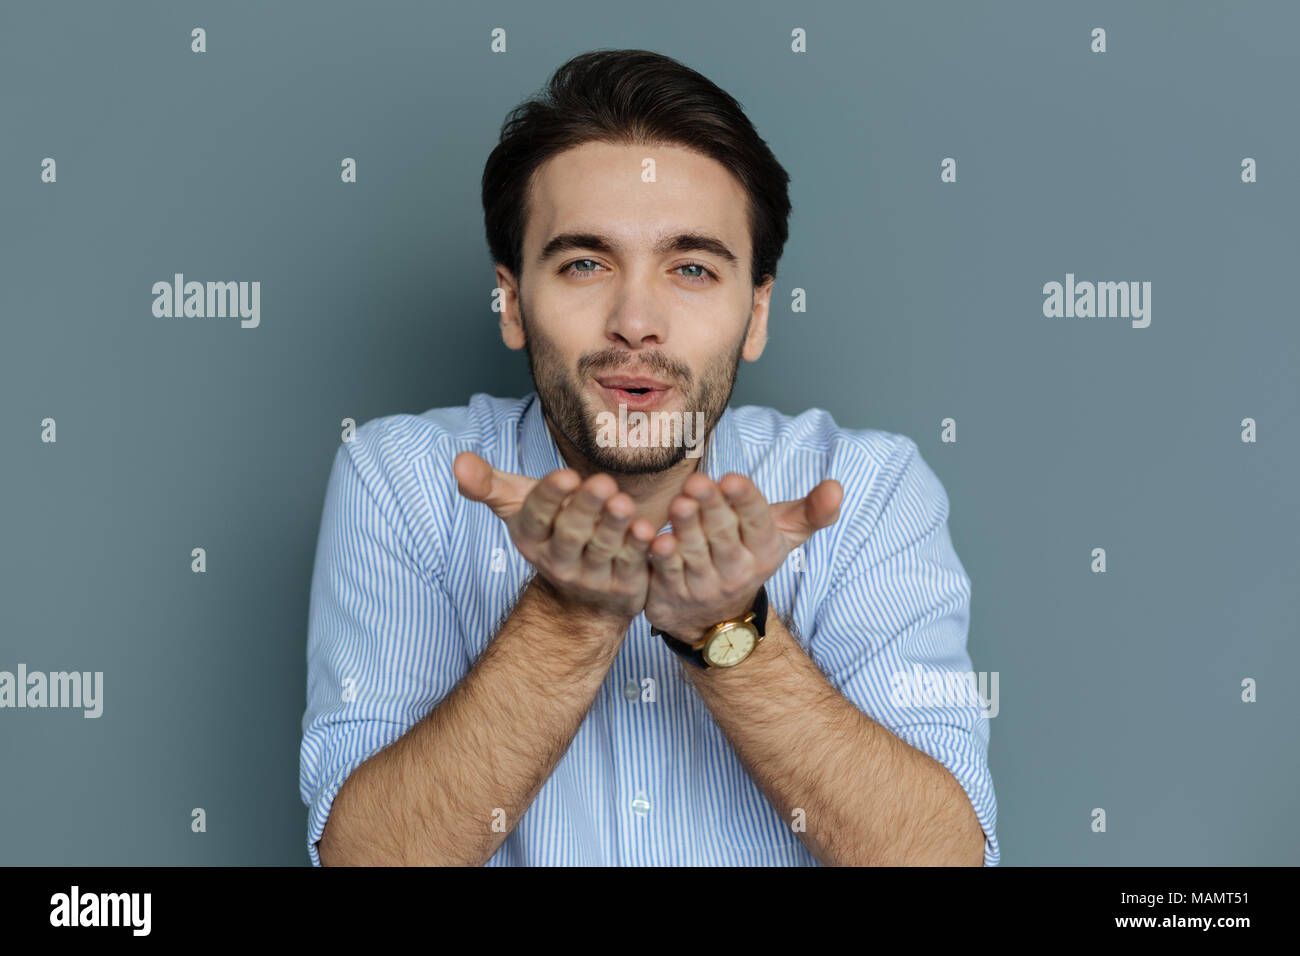 Delighted happy man expressing his feelings Stock Photo - Alamy